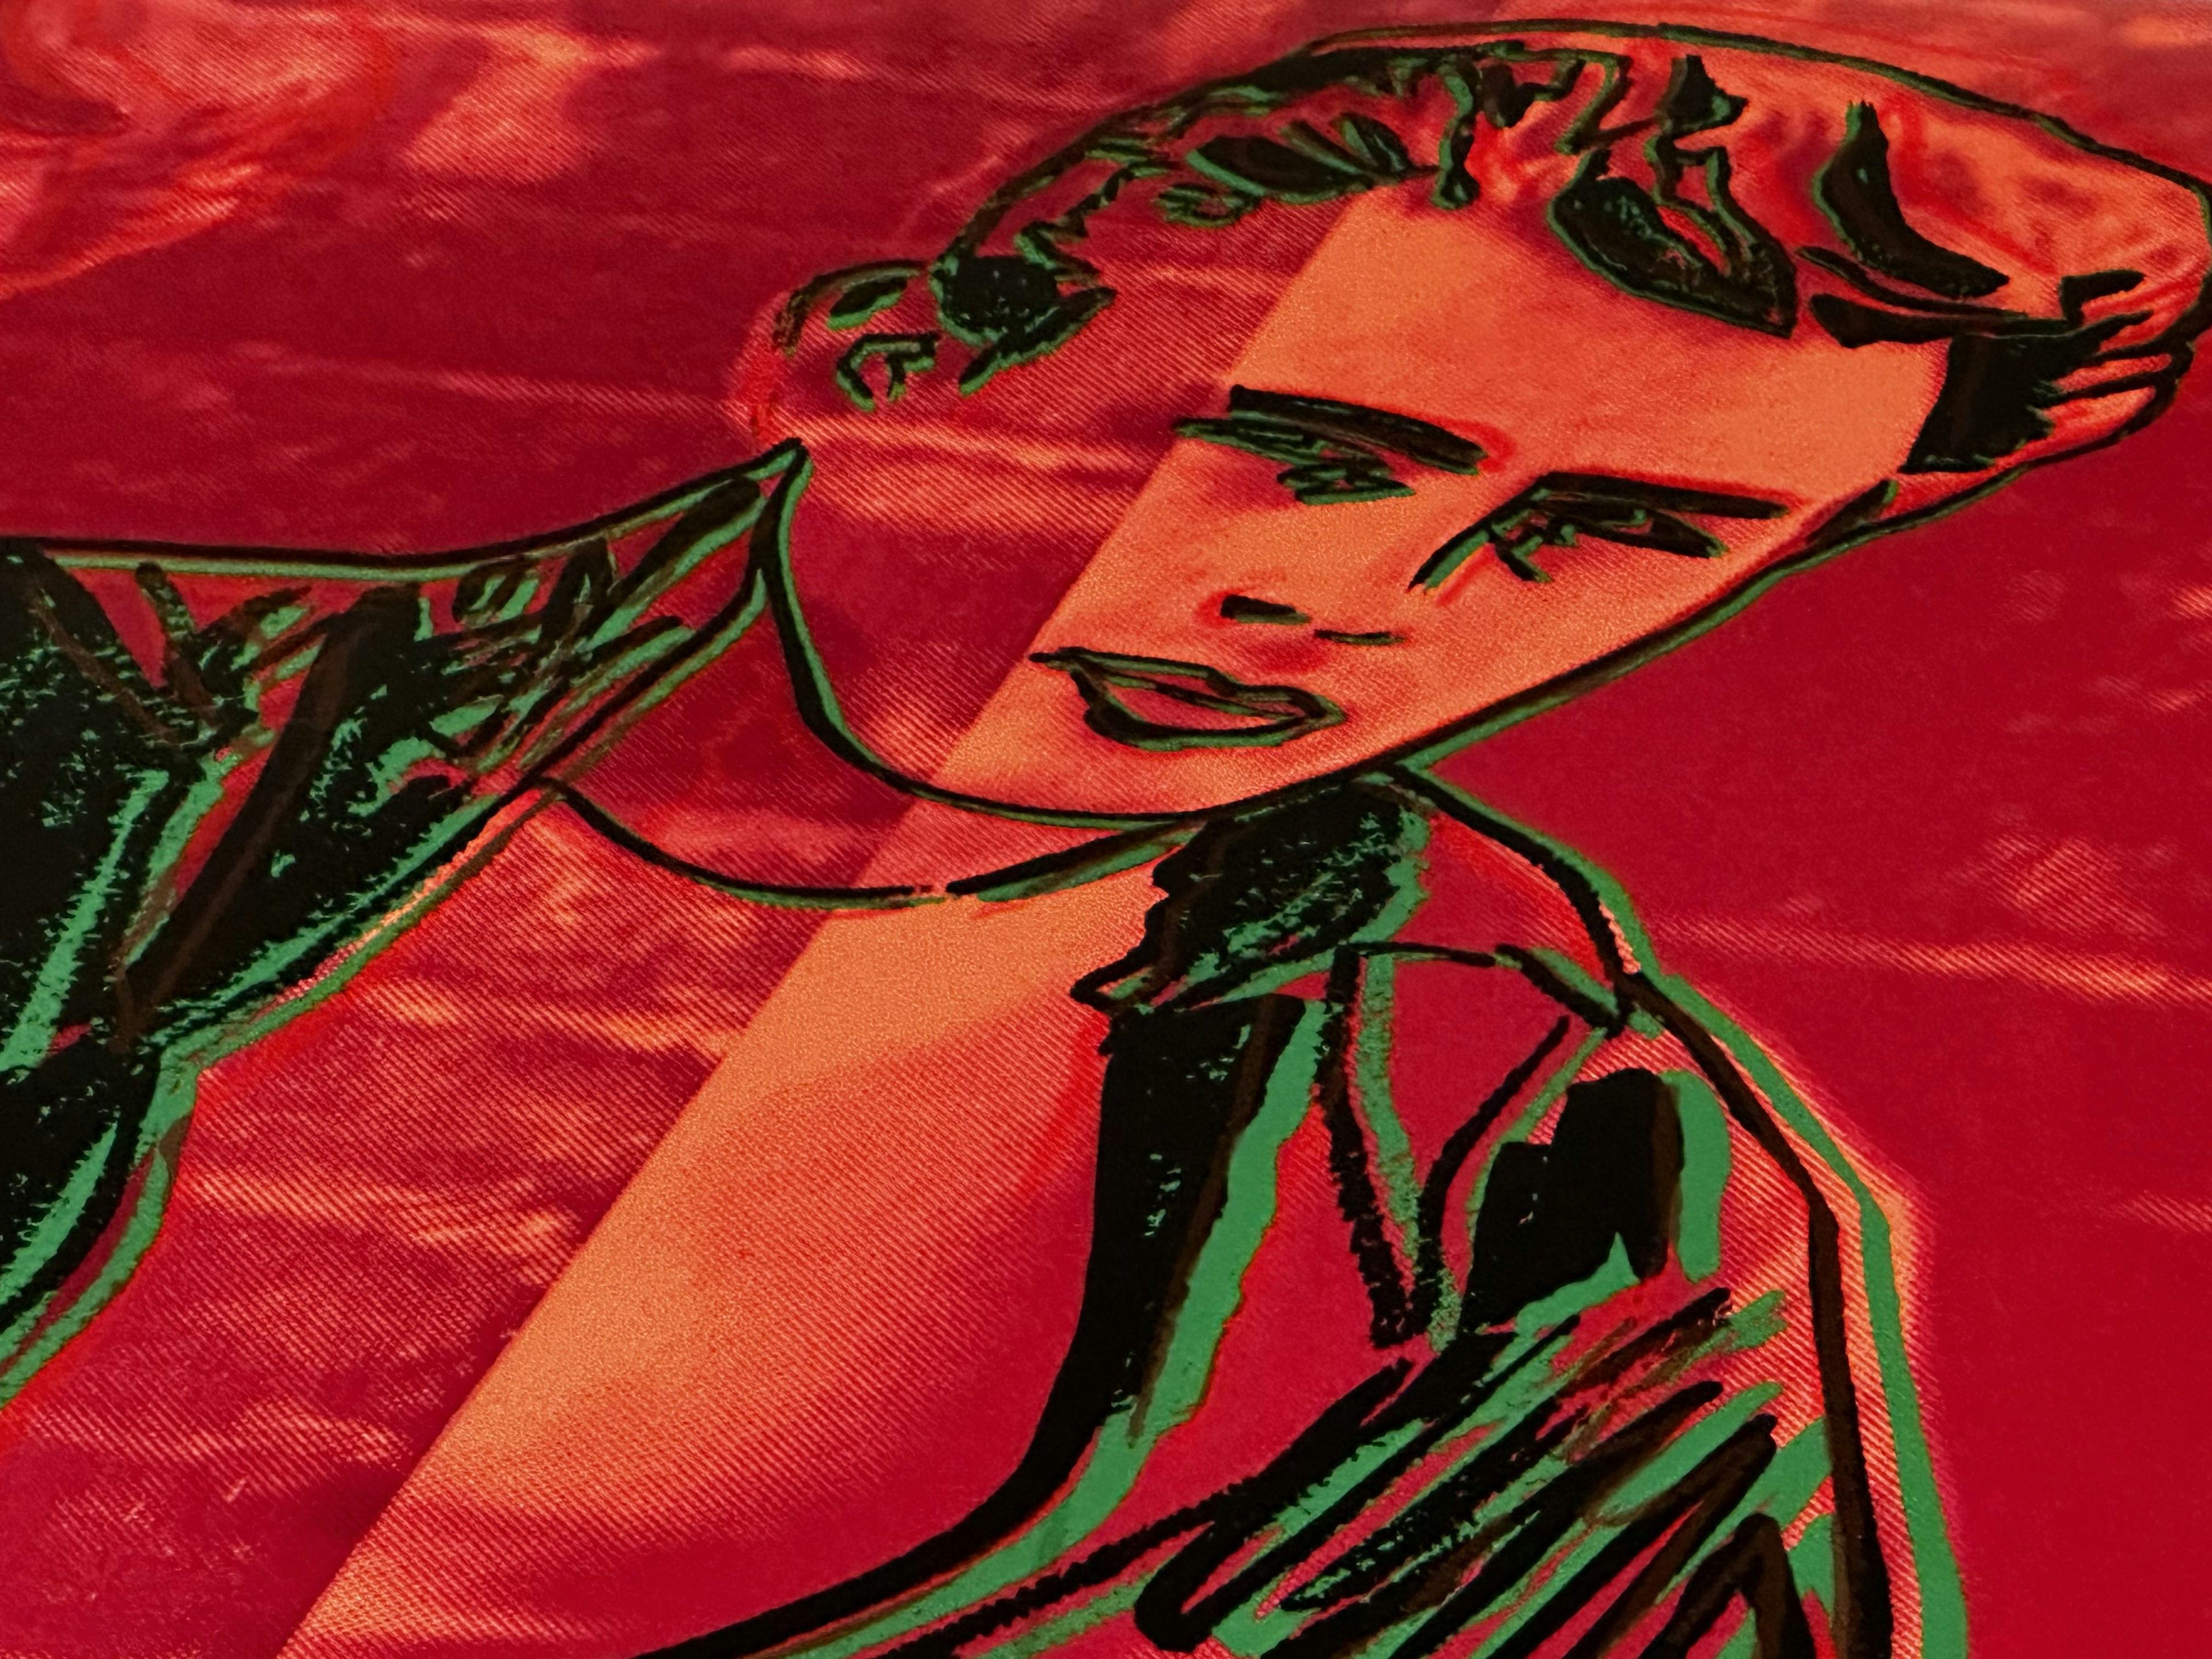 Warhol's Rebel Without a Cause (angle)